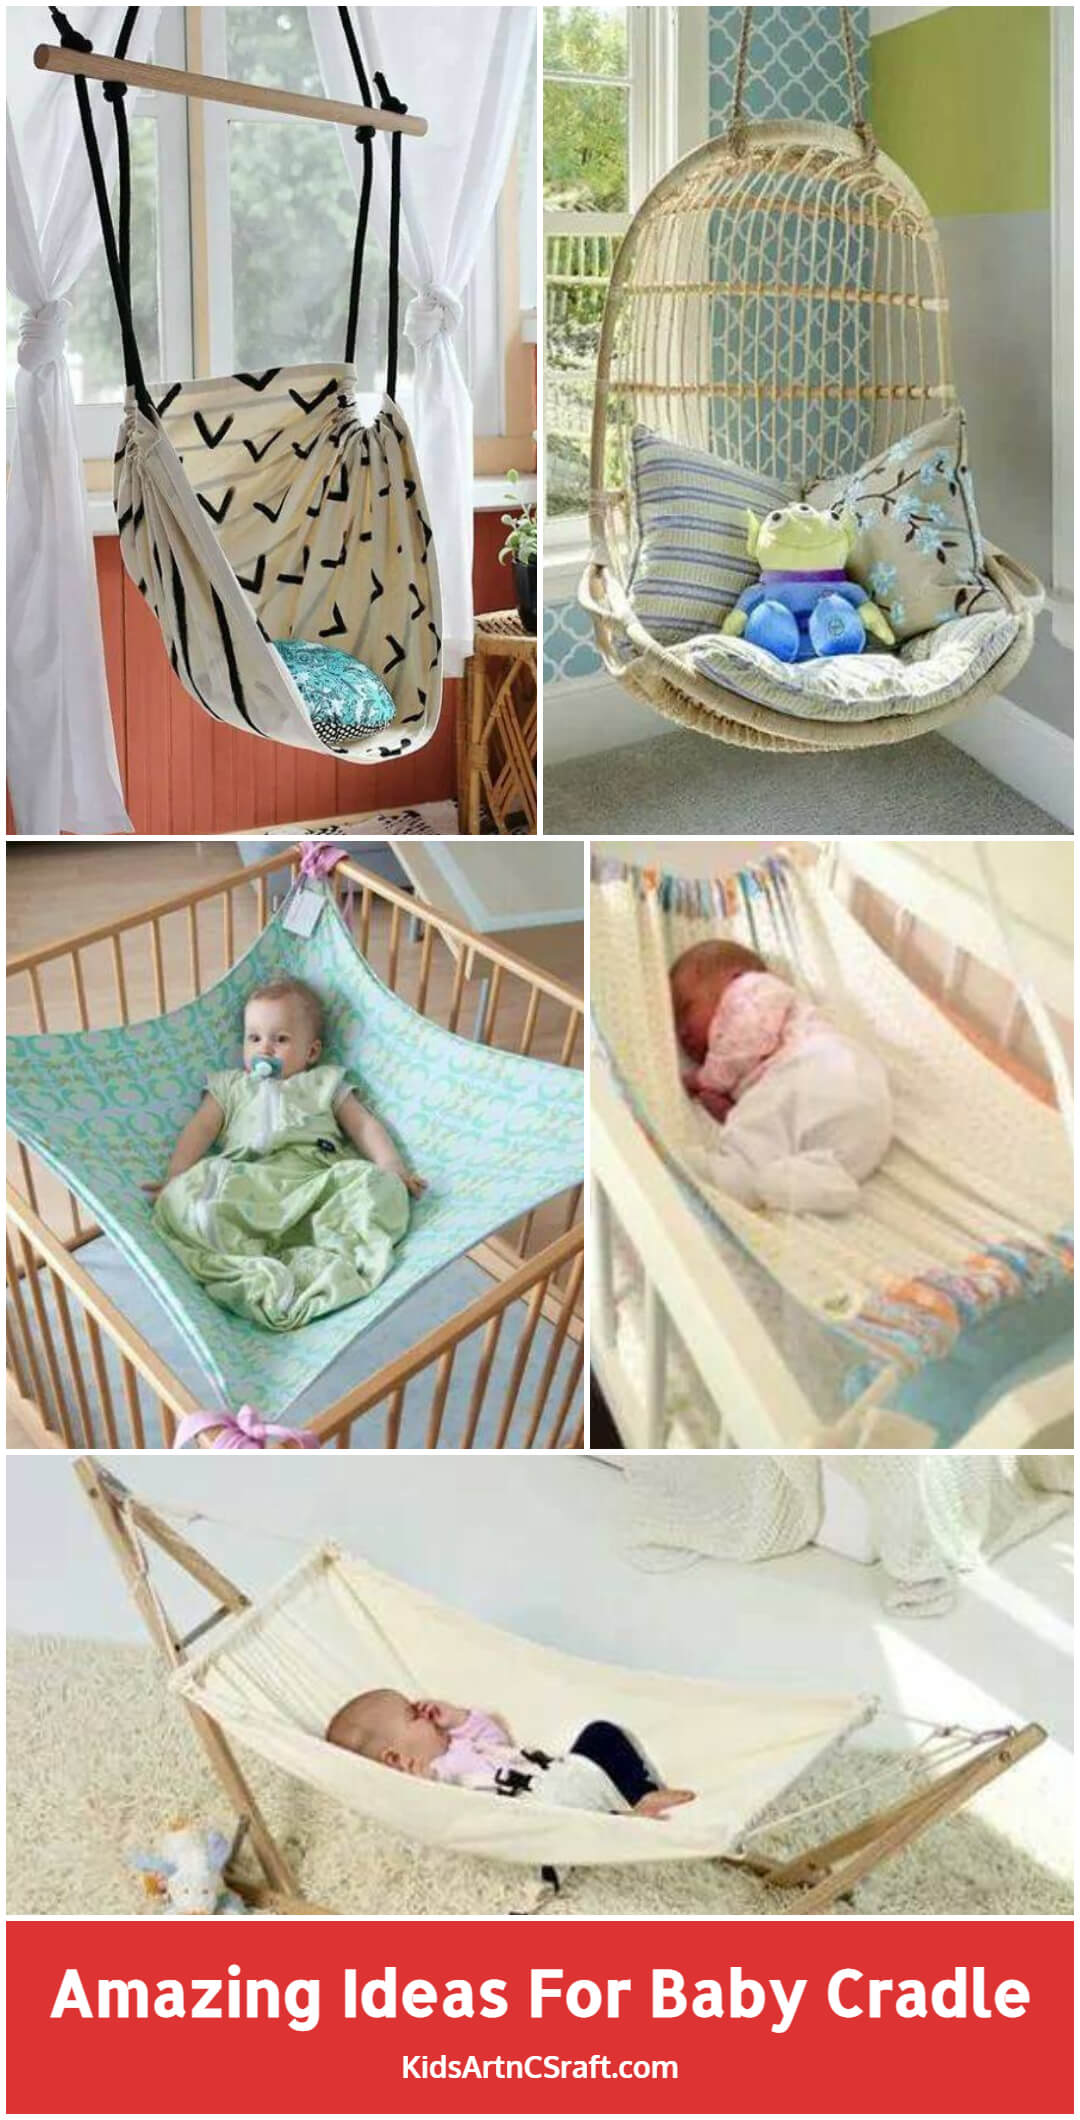 Amazing Ideas for Your Baby Cradle